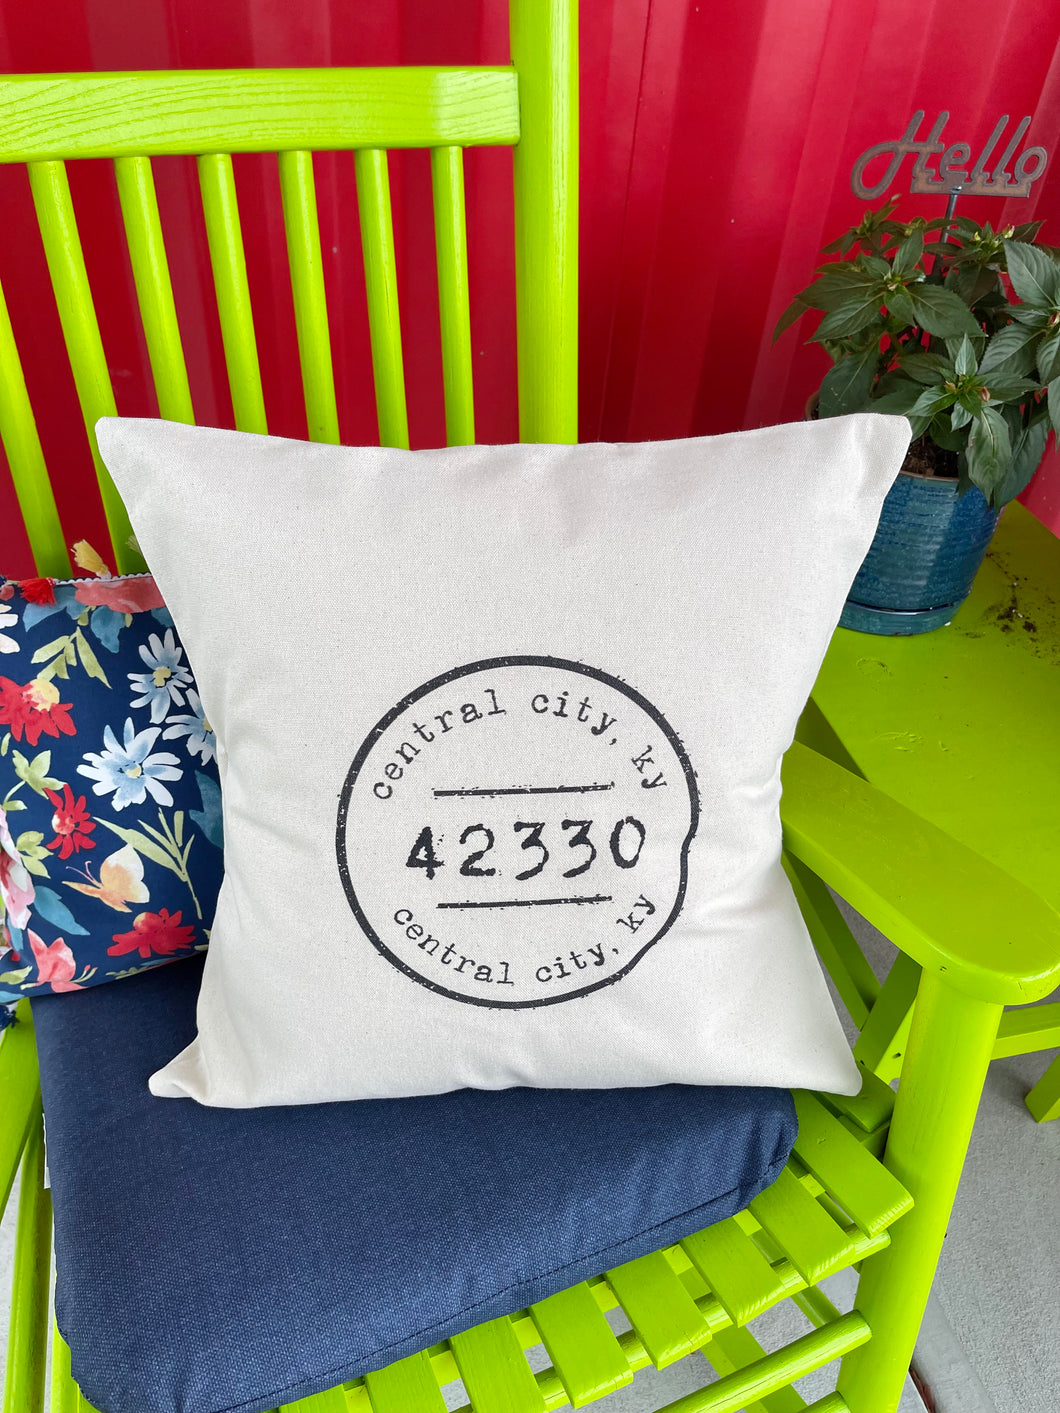 Postmark Stamp Central City, Ky 42330 - Square Canvas Pillow